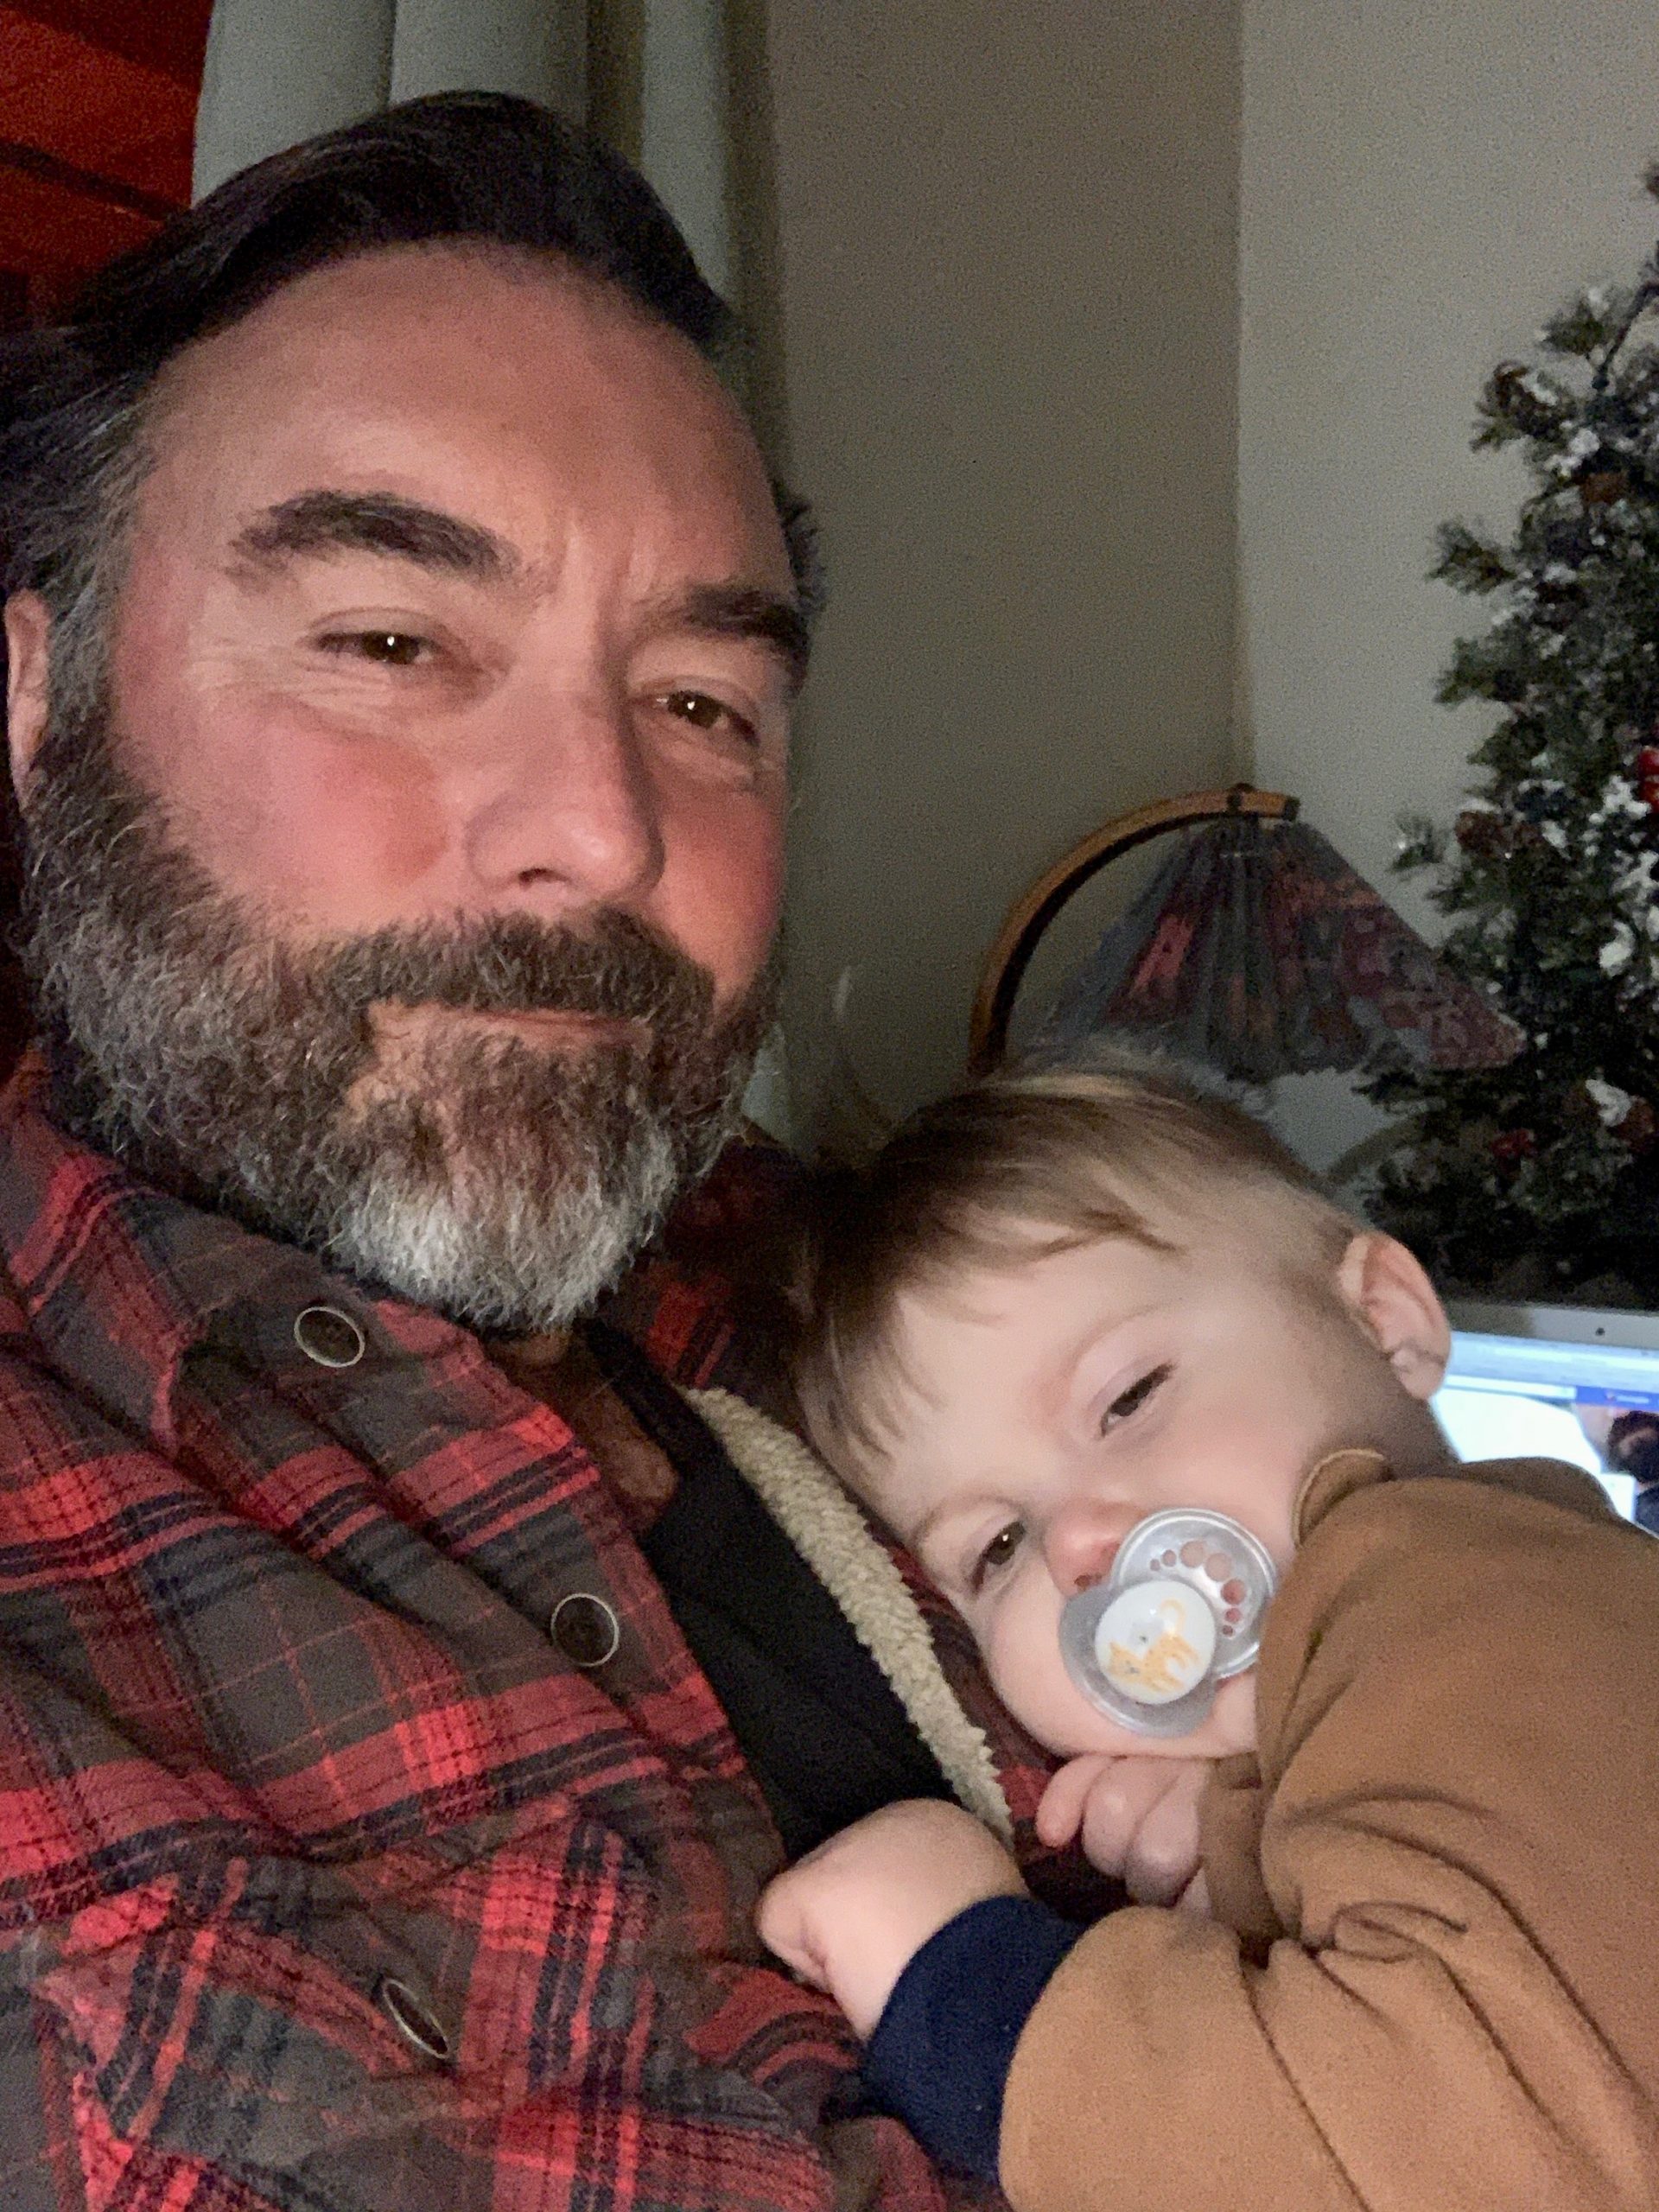 Although Julie was working, I had an unexpected New Year's cuddle from Liam. He was very tired and sad, and it took me over an hour to get him back to sleep. As a grandparent, I guess I’m supposed to say I don’t miss this. But, the truth is, I know it won’t be long until I won’t have it, and I’ll miss it once again.